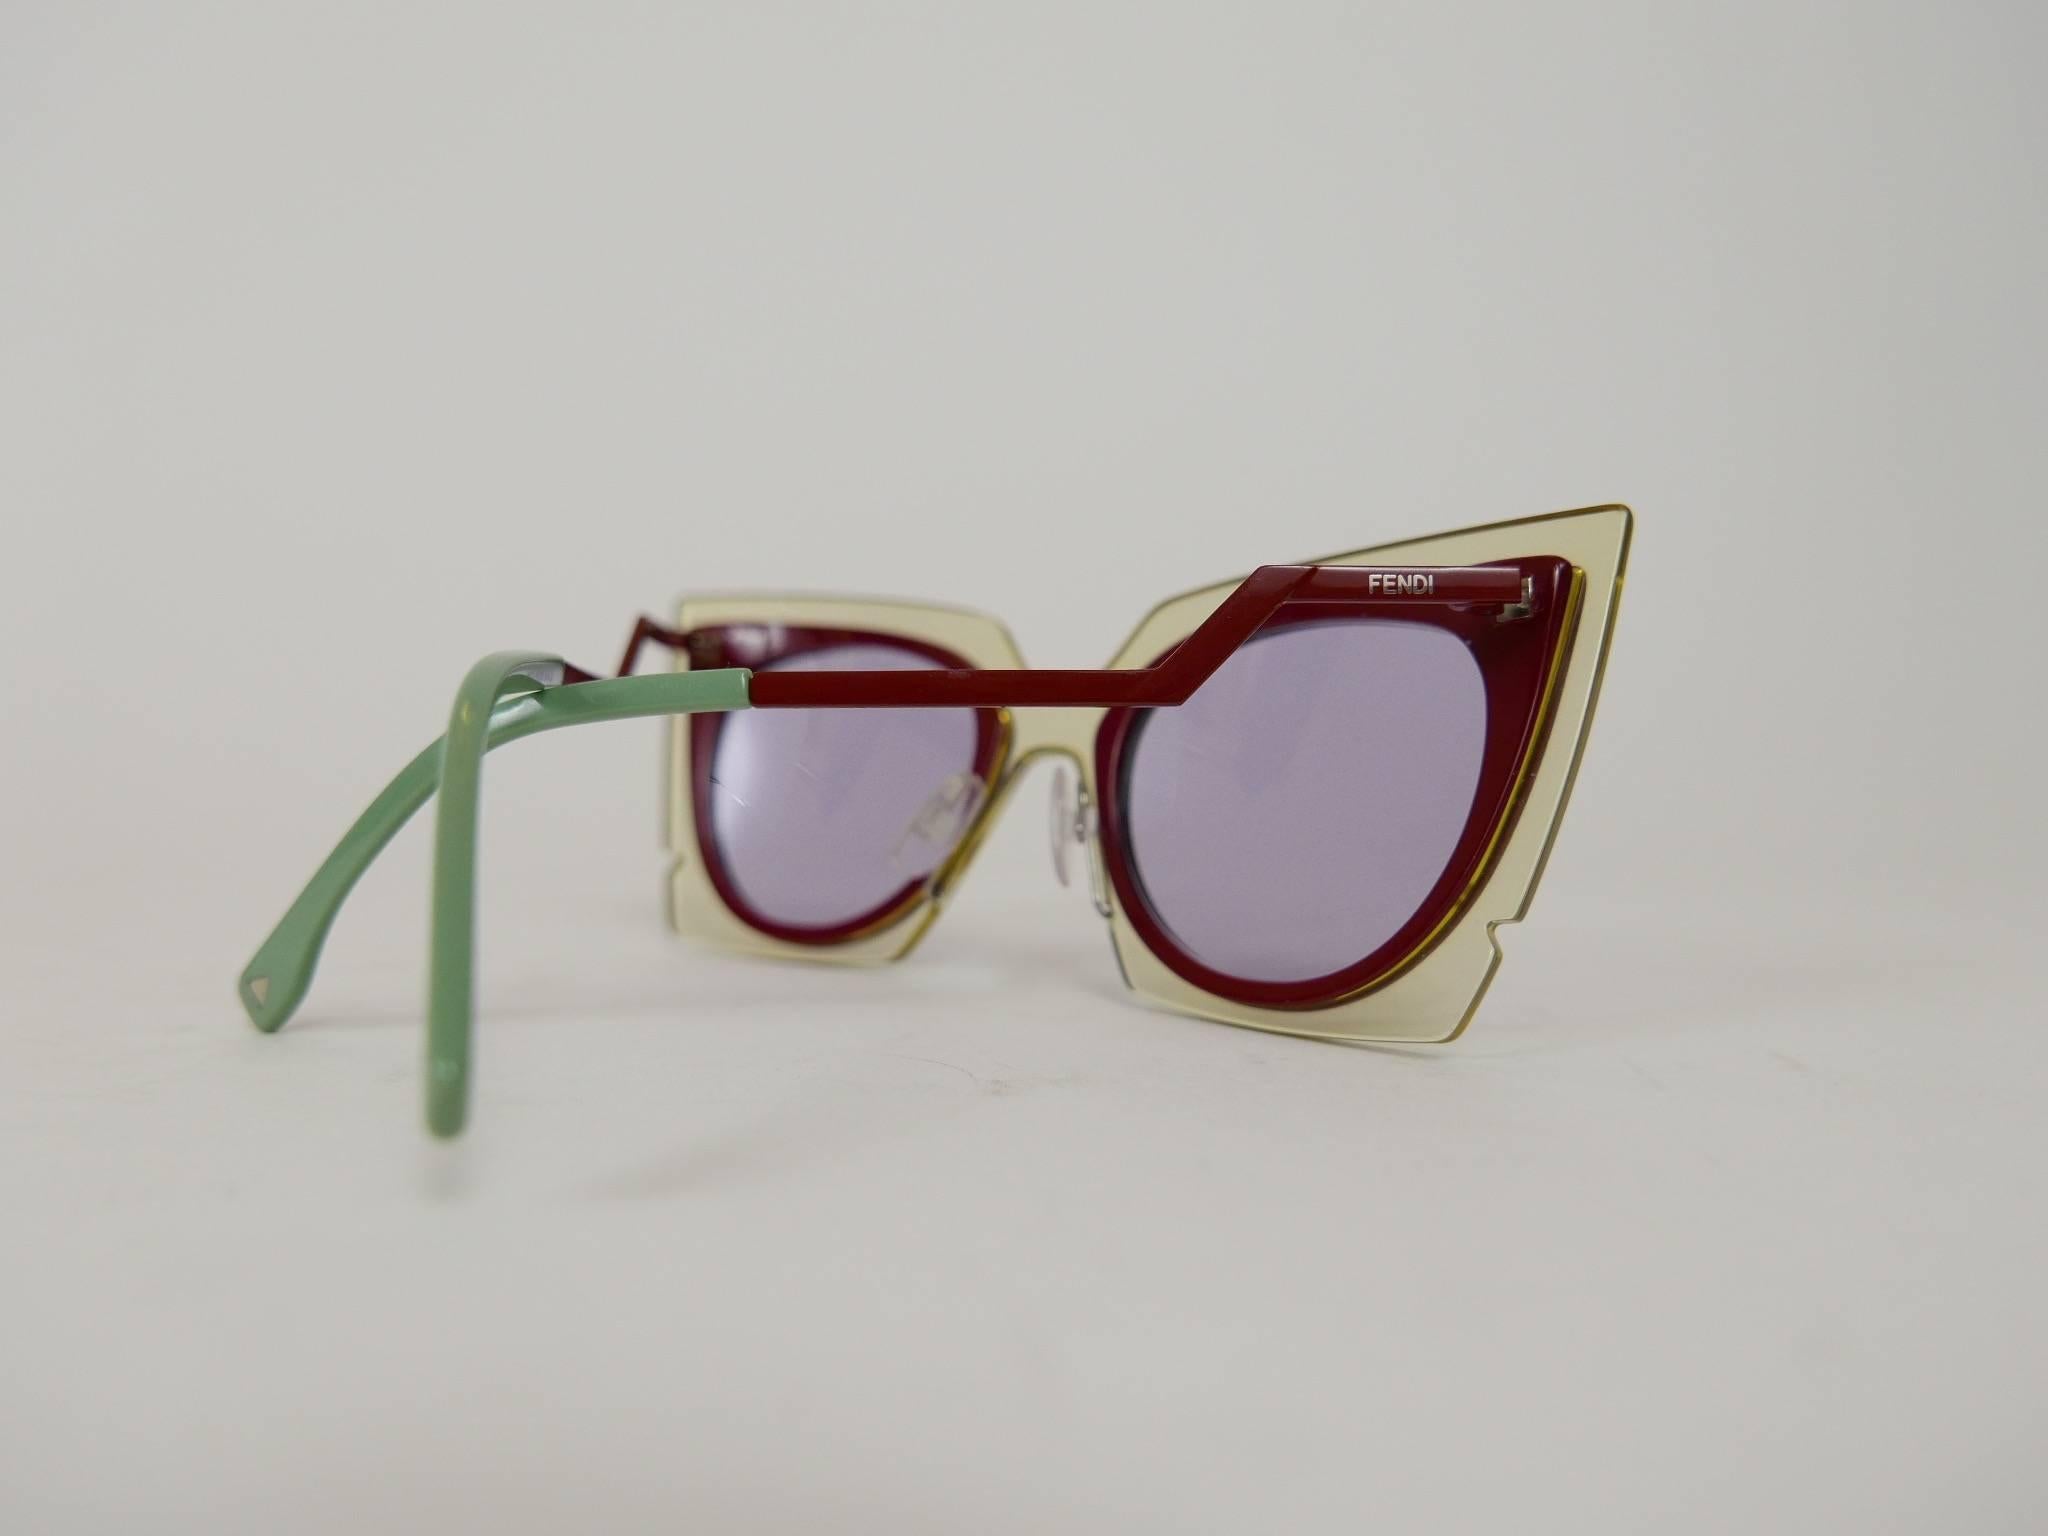 These stunning Fendi fashion show cat-eye orchid sunglasses, from the Fendi Orchidea Sunglasses Collection are in Beige Red & Burgundy colored acetate frames with square shape and irregular geometric cutouts. Thin metal arms with angled details and